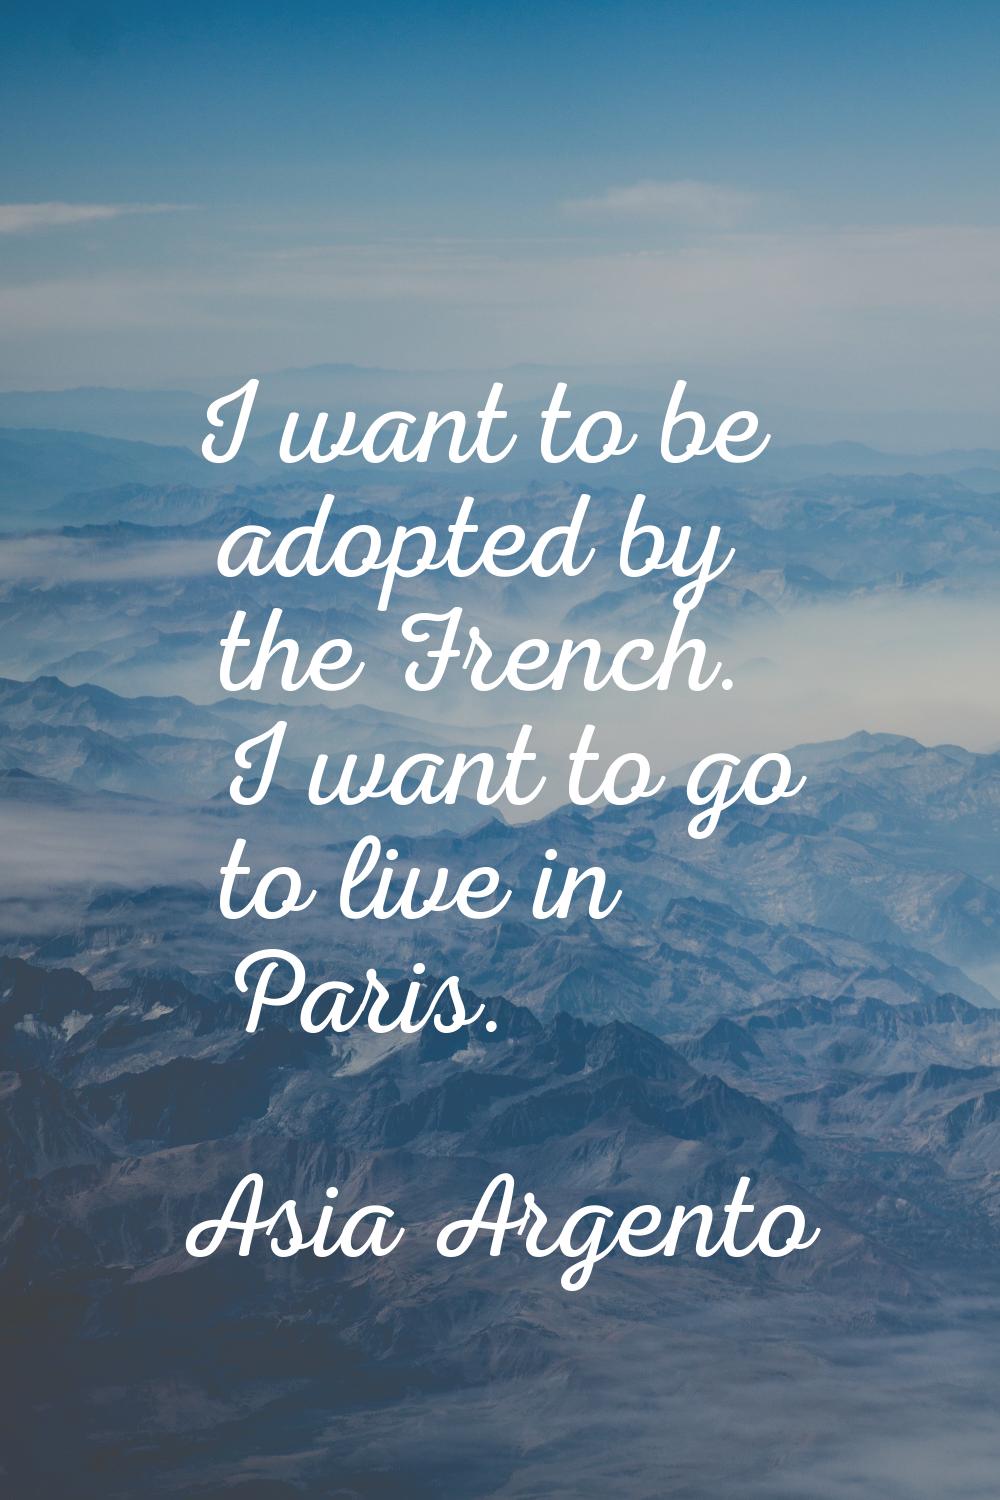 I want to be adopted by the French. I want to go to live in Paris.